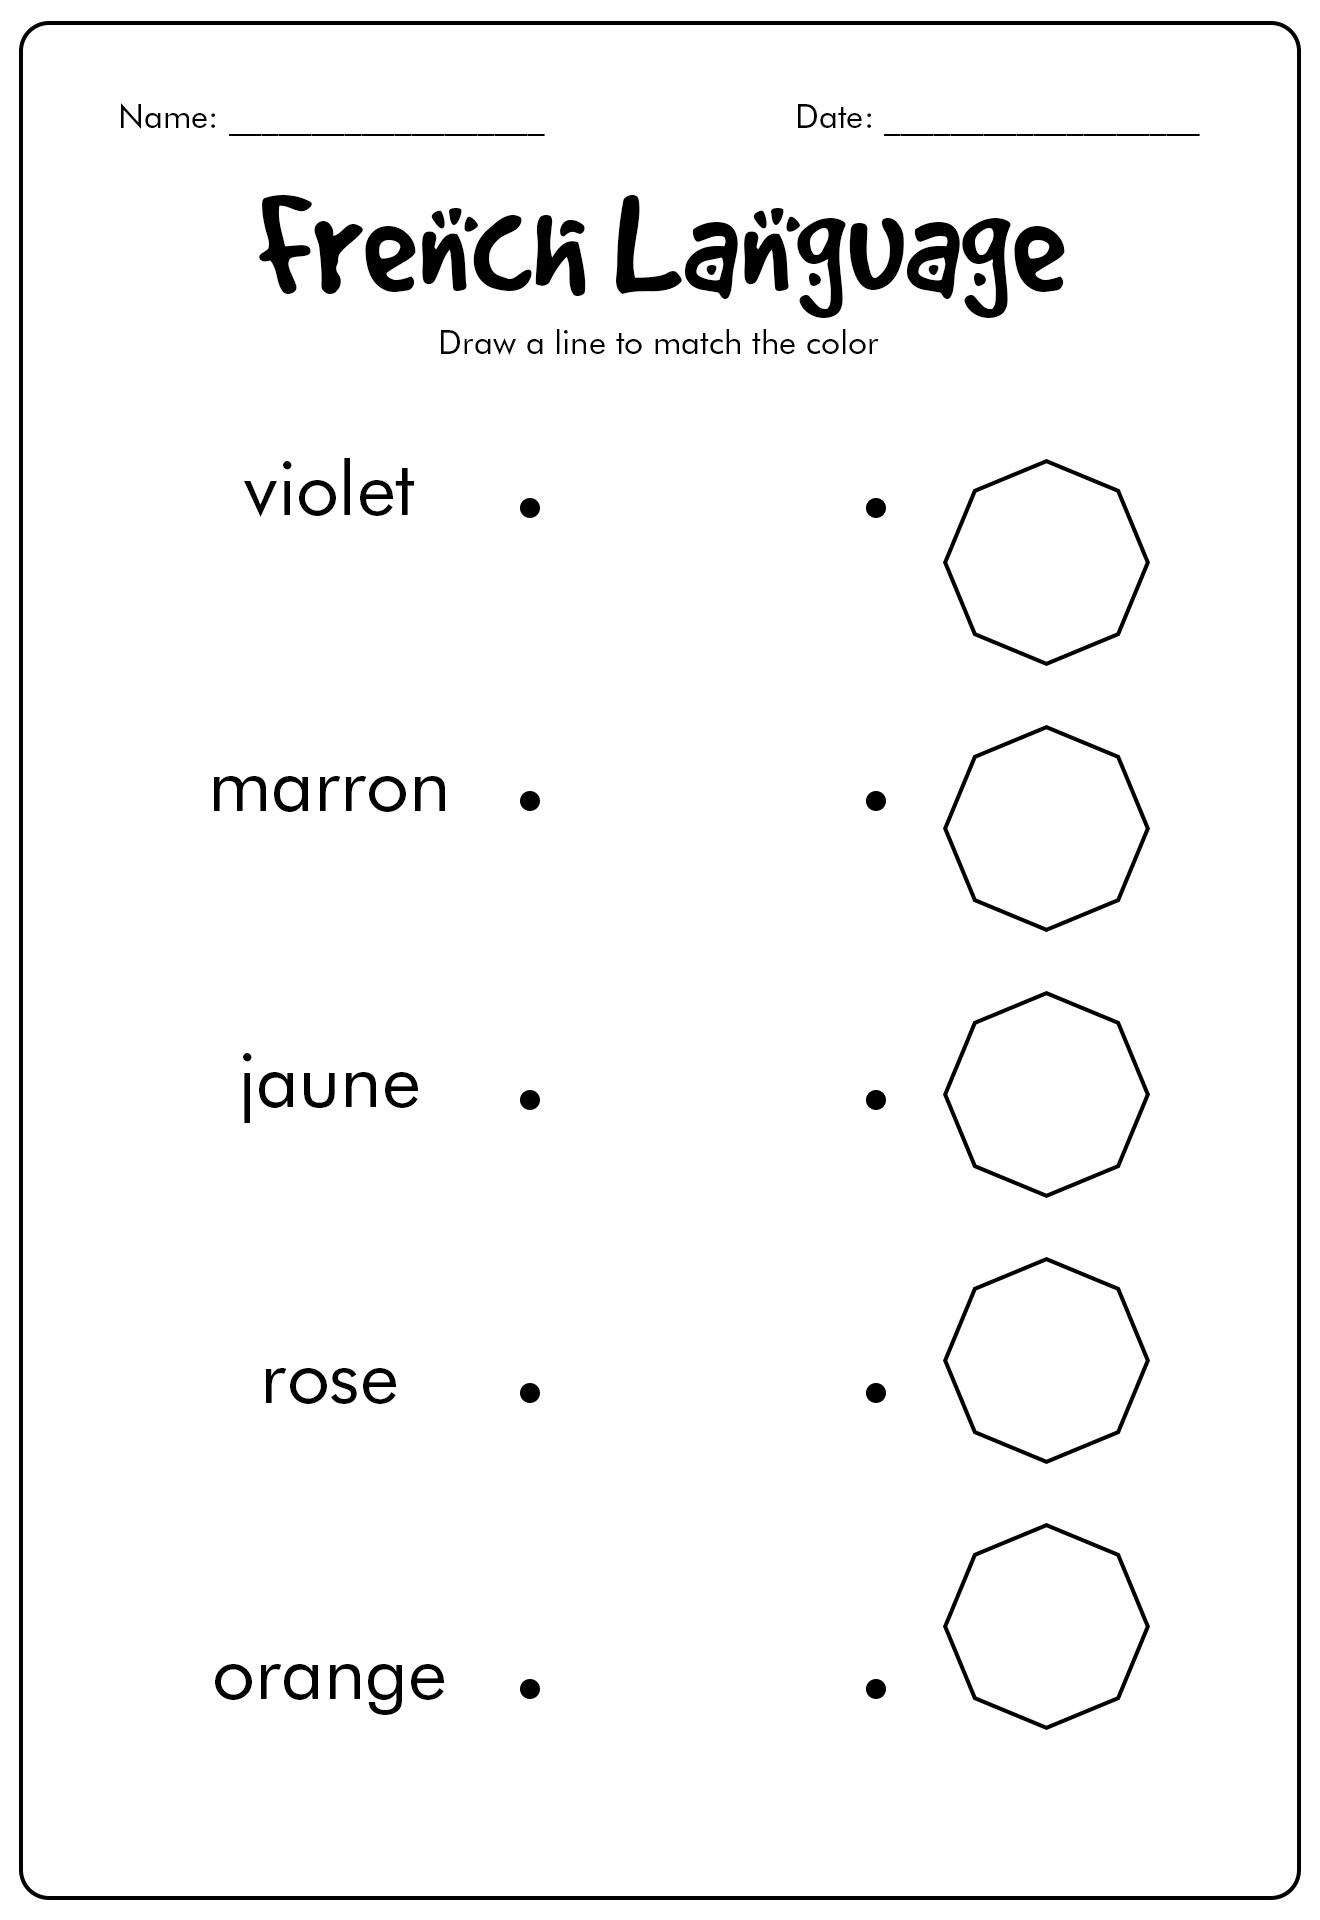 11-best-images-of-beginner-french-worksheets-free-printable-french